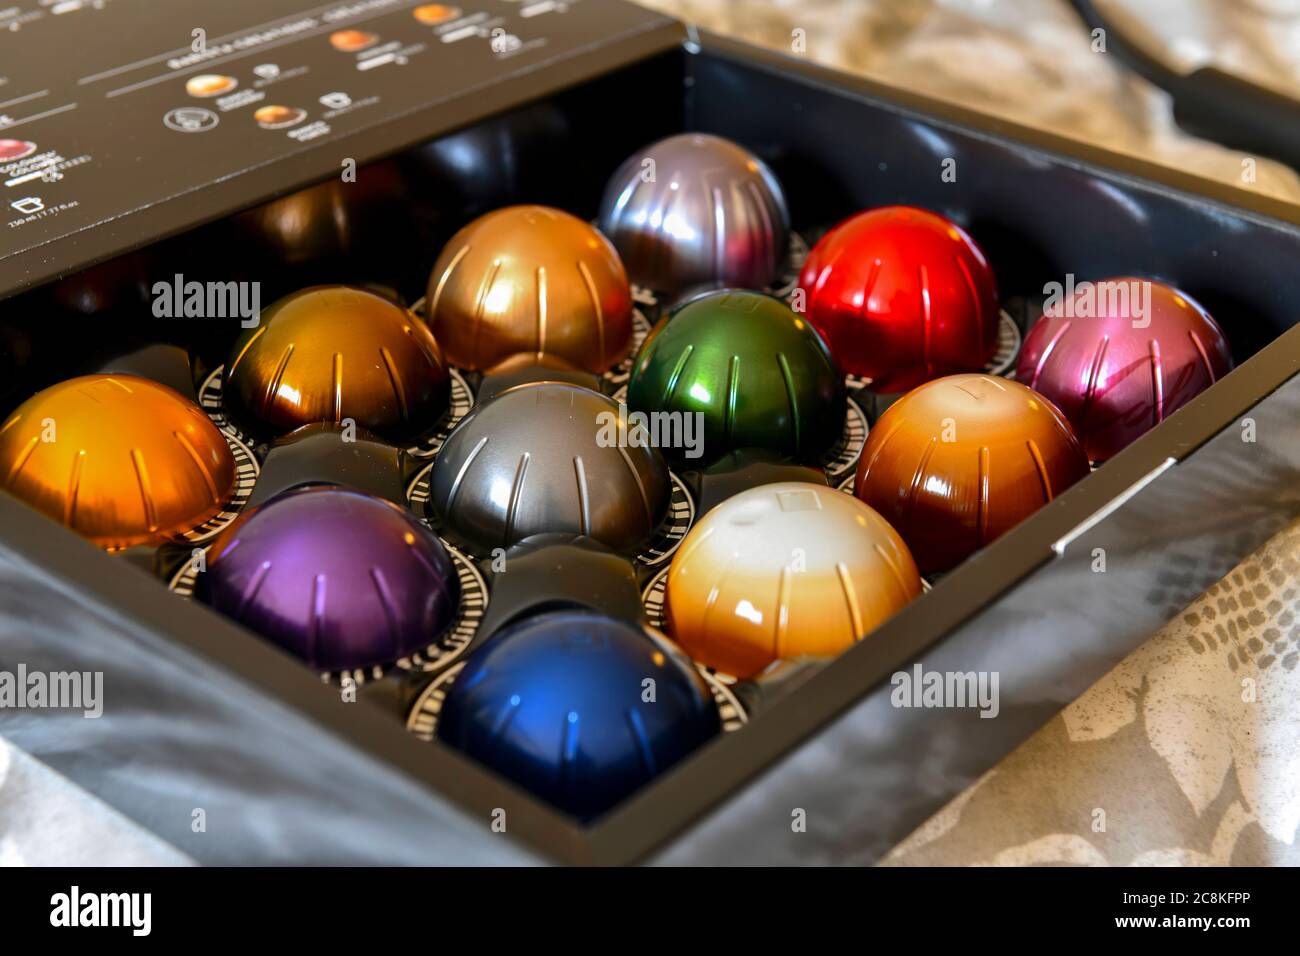 Colorful coffee pods in nice packaged box for espresso and cappuccino maker, near ones purposely blurred Stock Photo